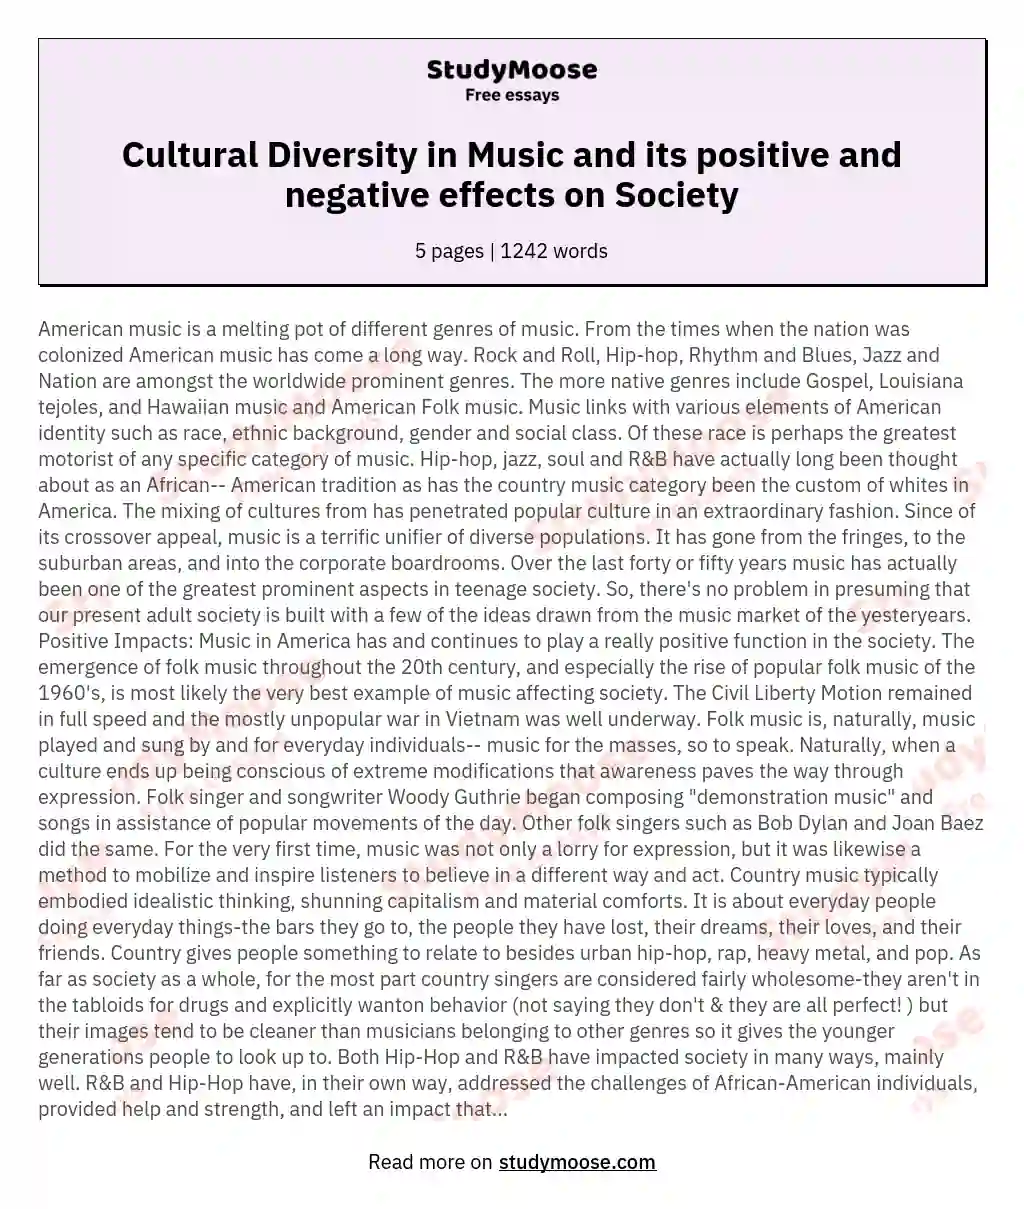 Cultural Diversity in Music and its positive and negative effects on Society